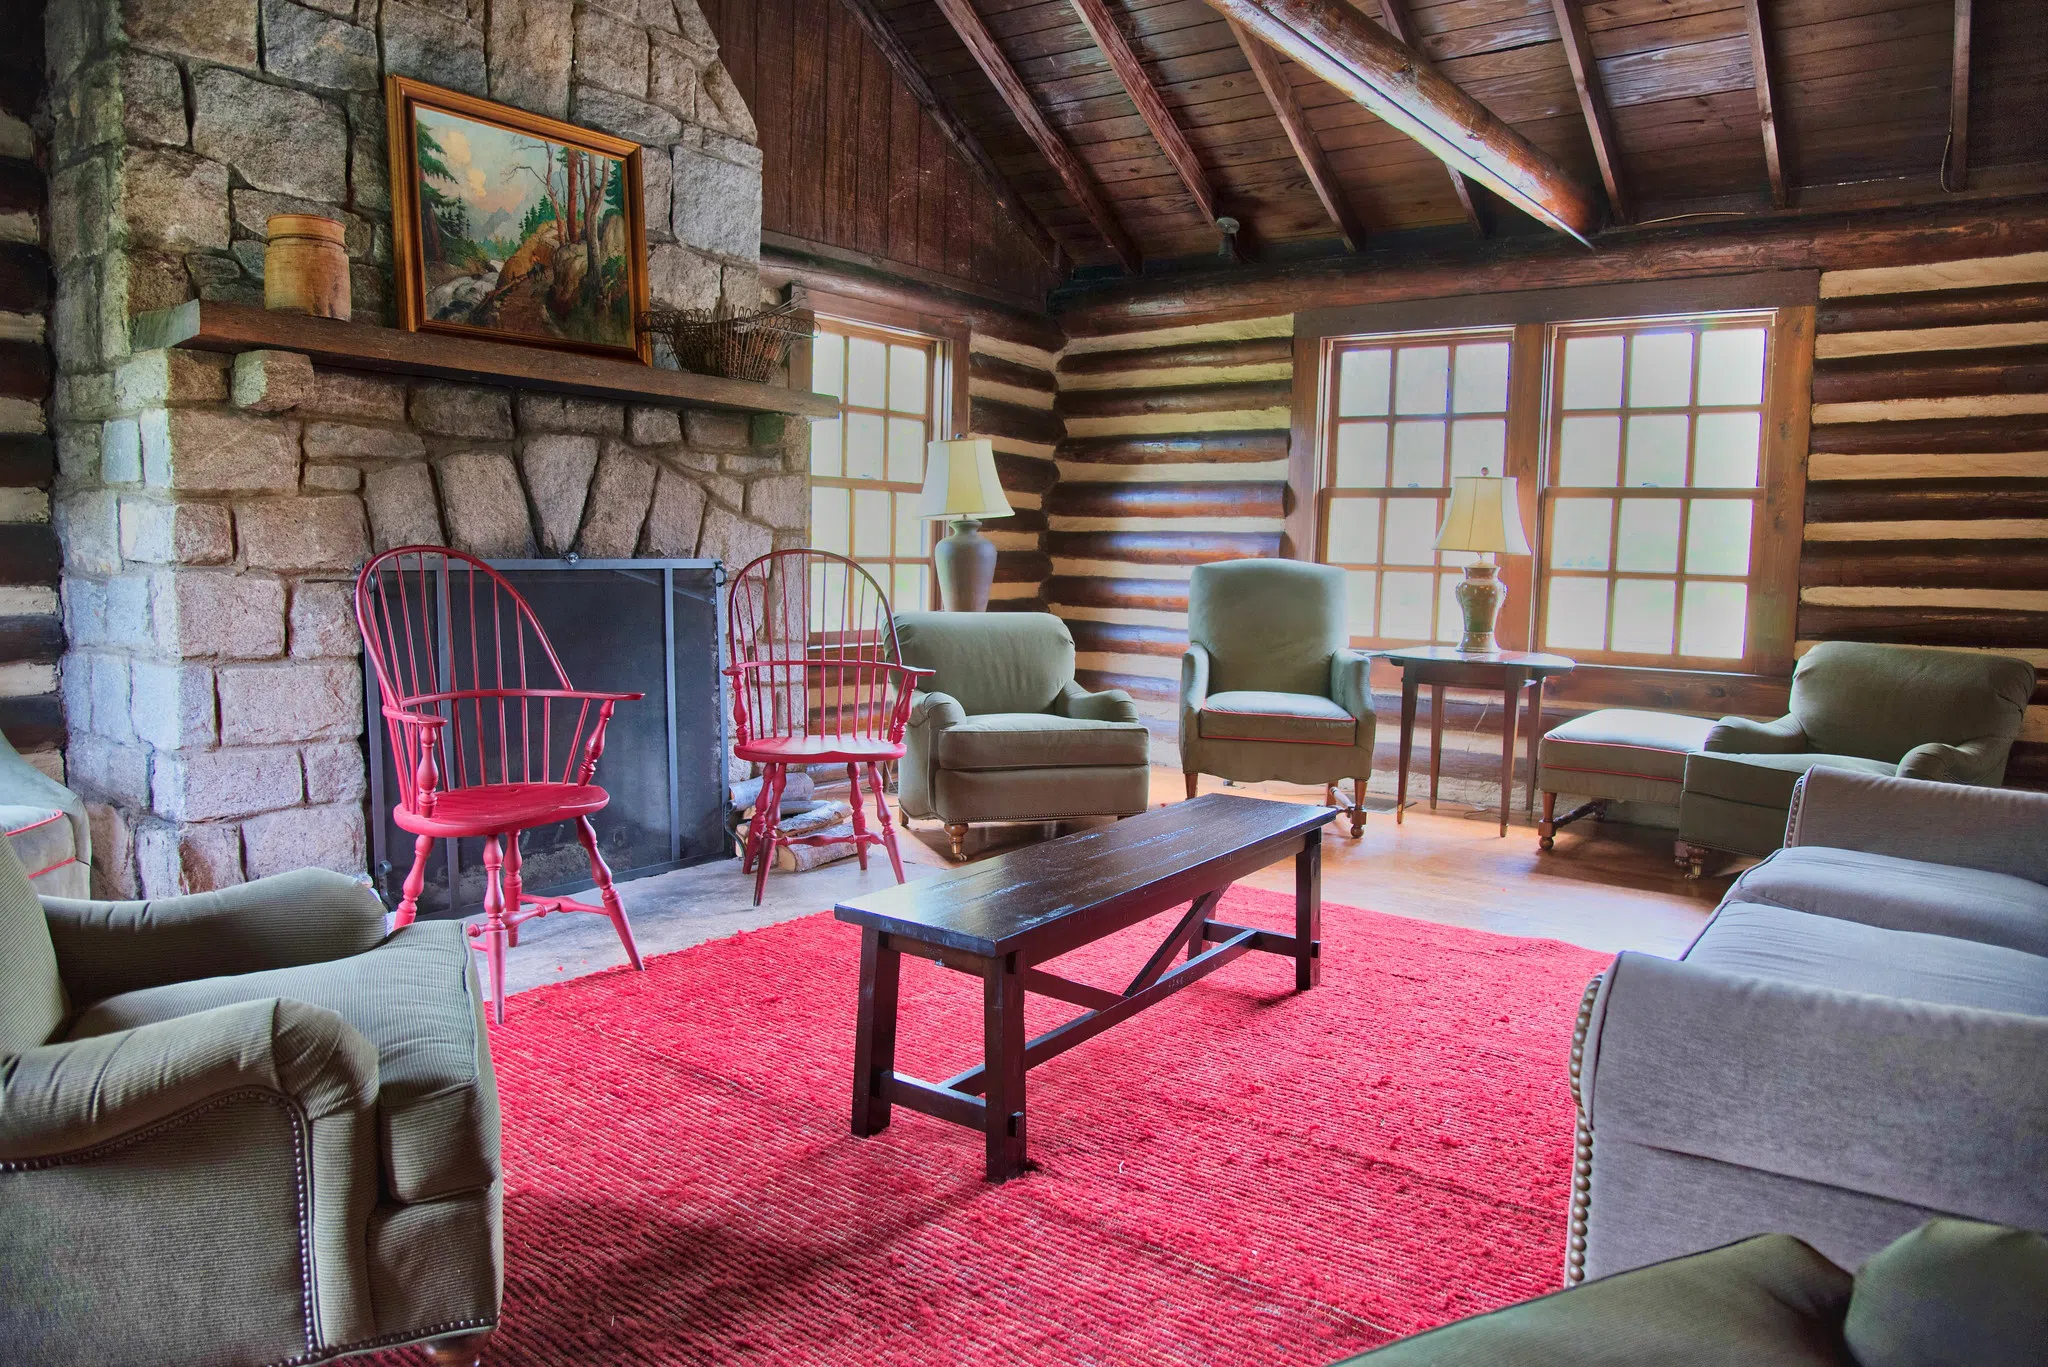 A variety of small tables, sofas and chairs appear on a red rug, facing a large stone fireplace. Wooden wall and large windows appear in the background.